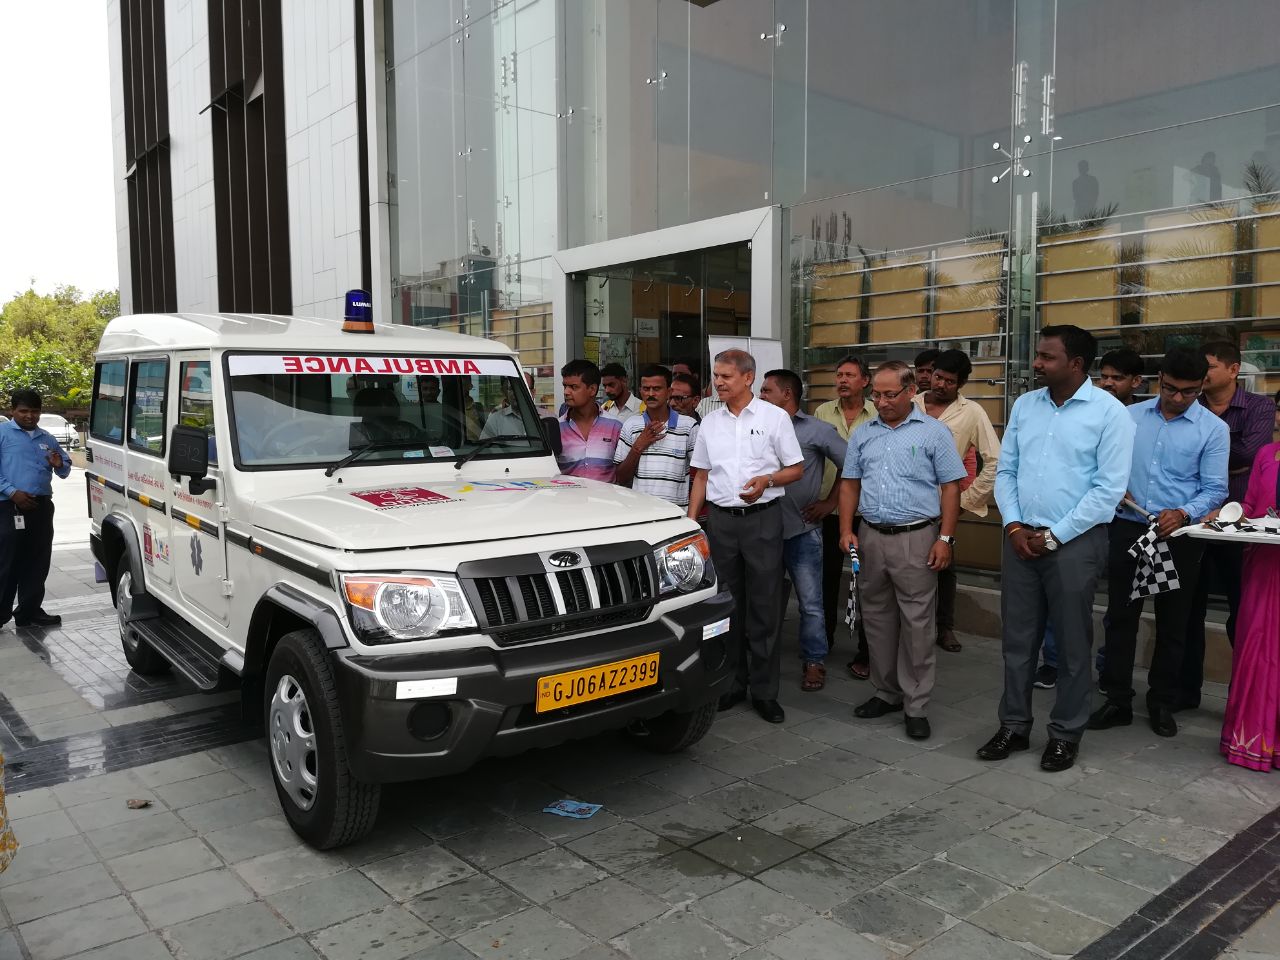 HCG foundation with the help of ONGC Vadodara launched free cancer screening ambulance